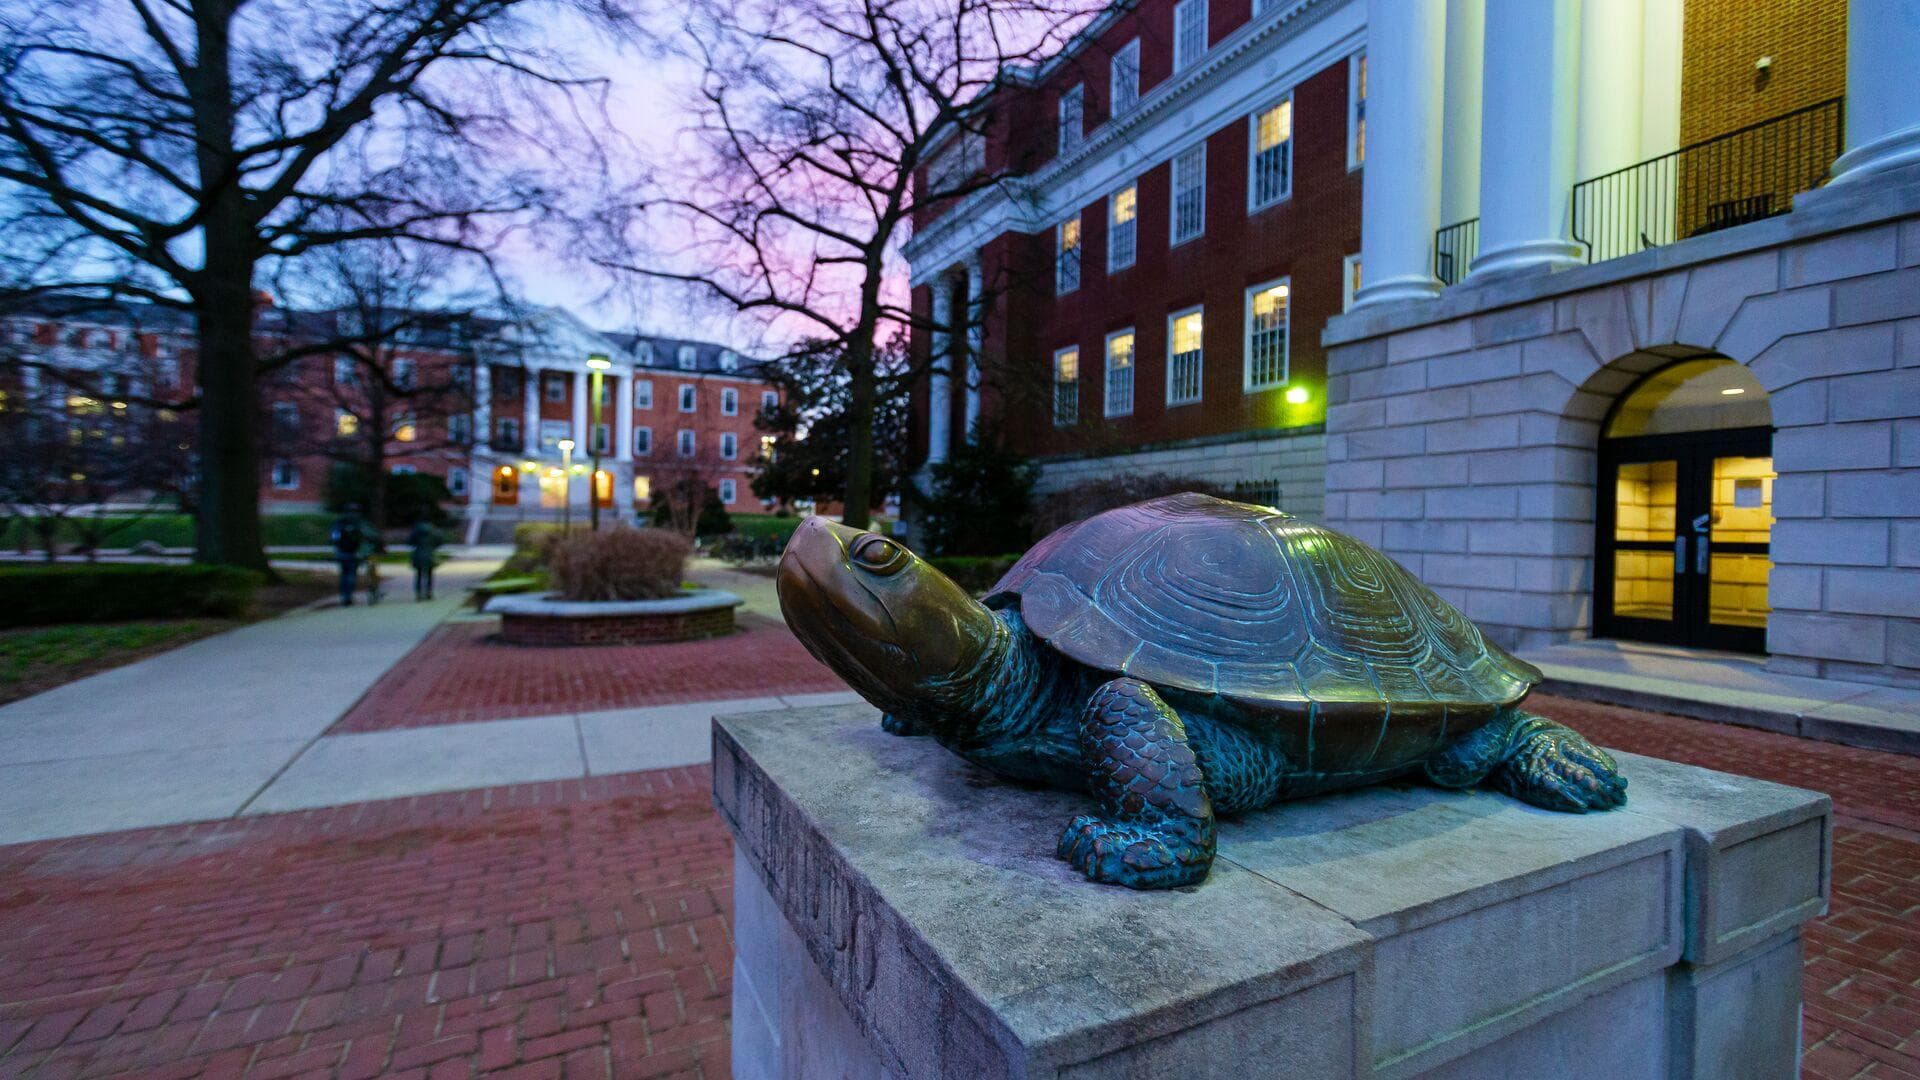 Testudo statue in front of McKeldin Library on a January evening